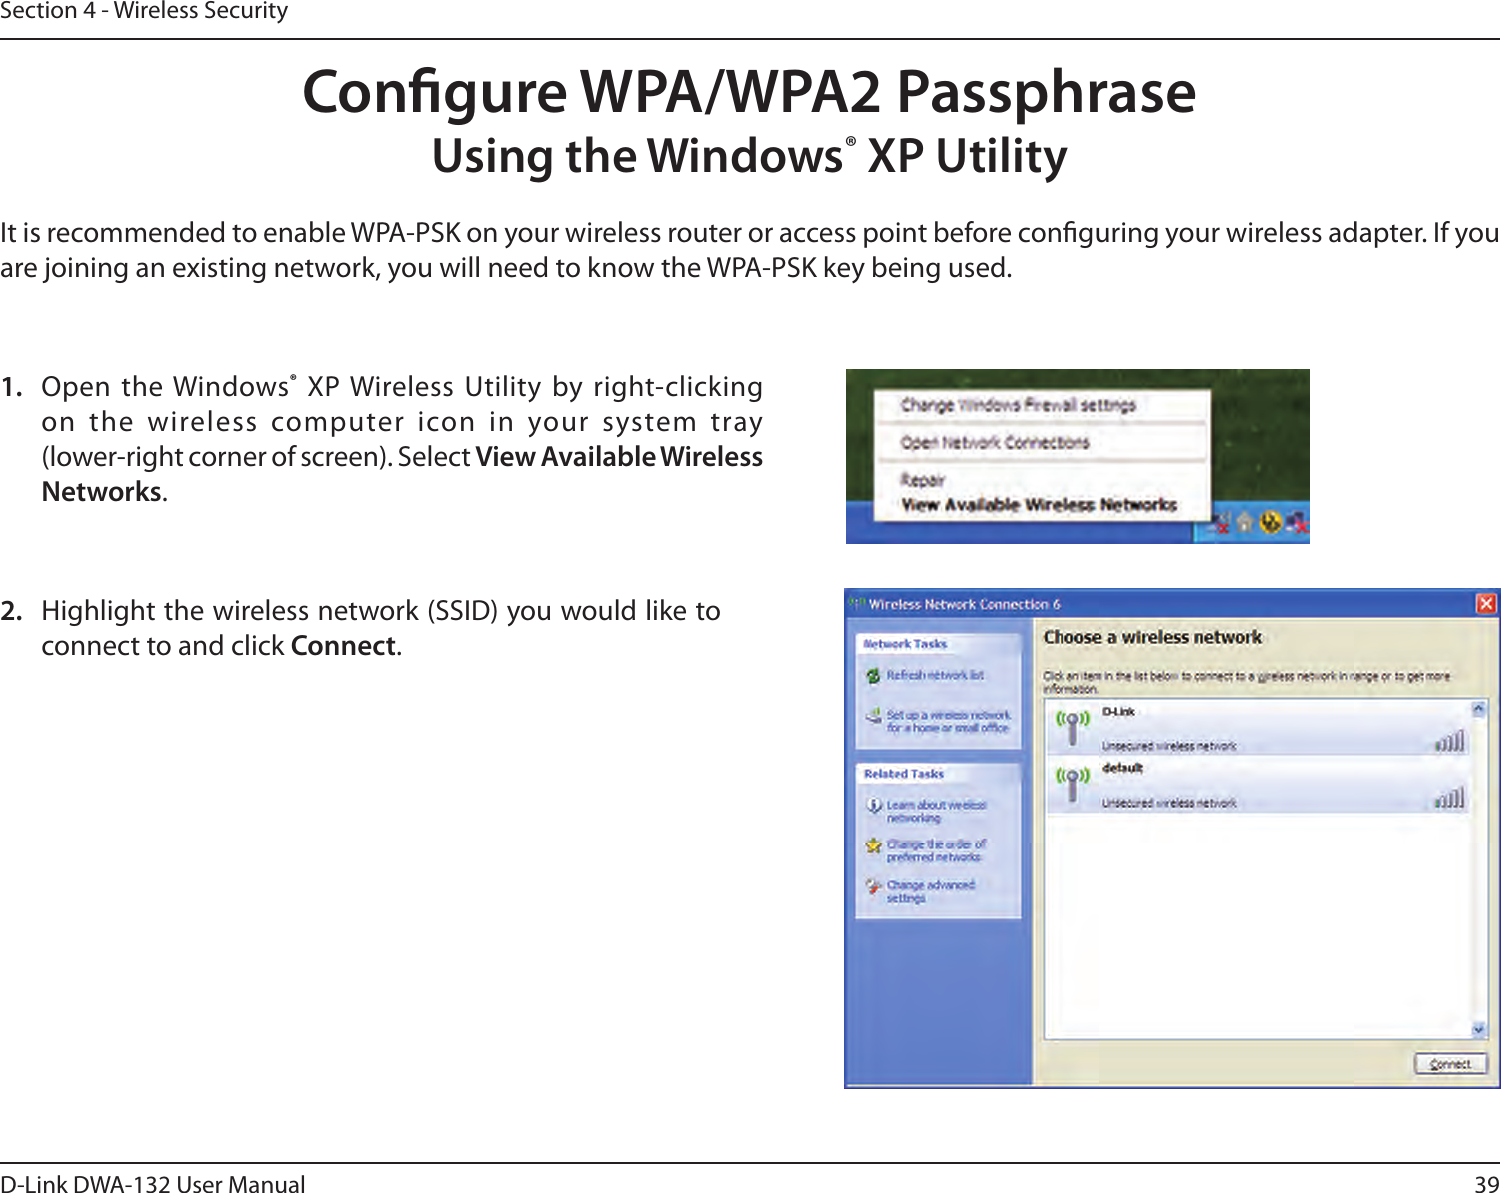 39D-Link DWA-132 User ManualSection 4 - Wireless SecurityCongure WPA/WPA2 PassphraseUsing the Windows® XP UtilityIt is recommended to enable WPA-PSK on your wireless router or access point before conguring your wireless adapter. If you are joining an existing network, you will need to know the WPA-PSK key being used.2.  Highlight the wireless network (SSID) you would like to connect to and click Connect.1.  Open the Windows® XP Wireless Utility  by right-clicking on  the  wireless  computer  icon  in  your  system  tray  (lower-right corner of screen). Select View Available Wireless Networks. 